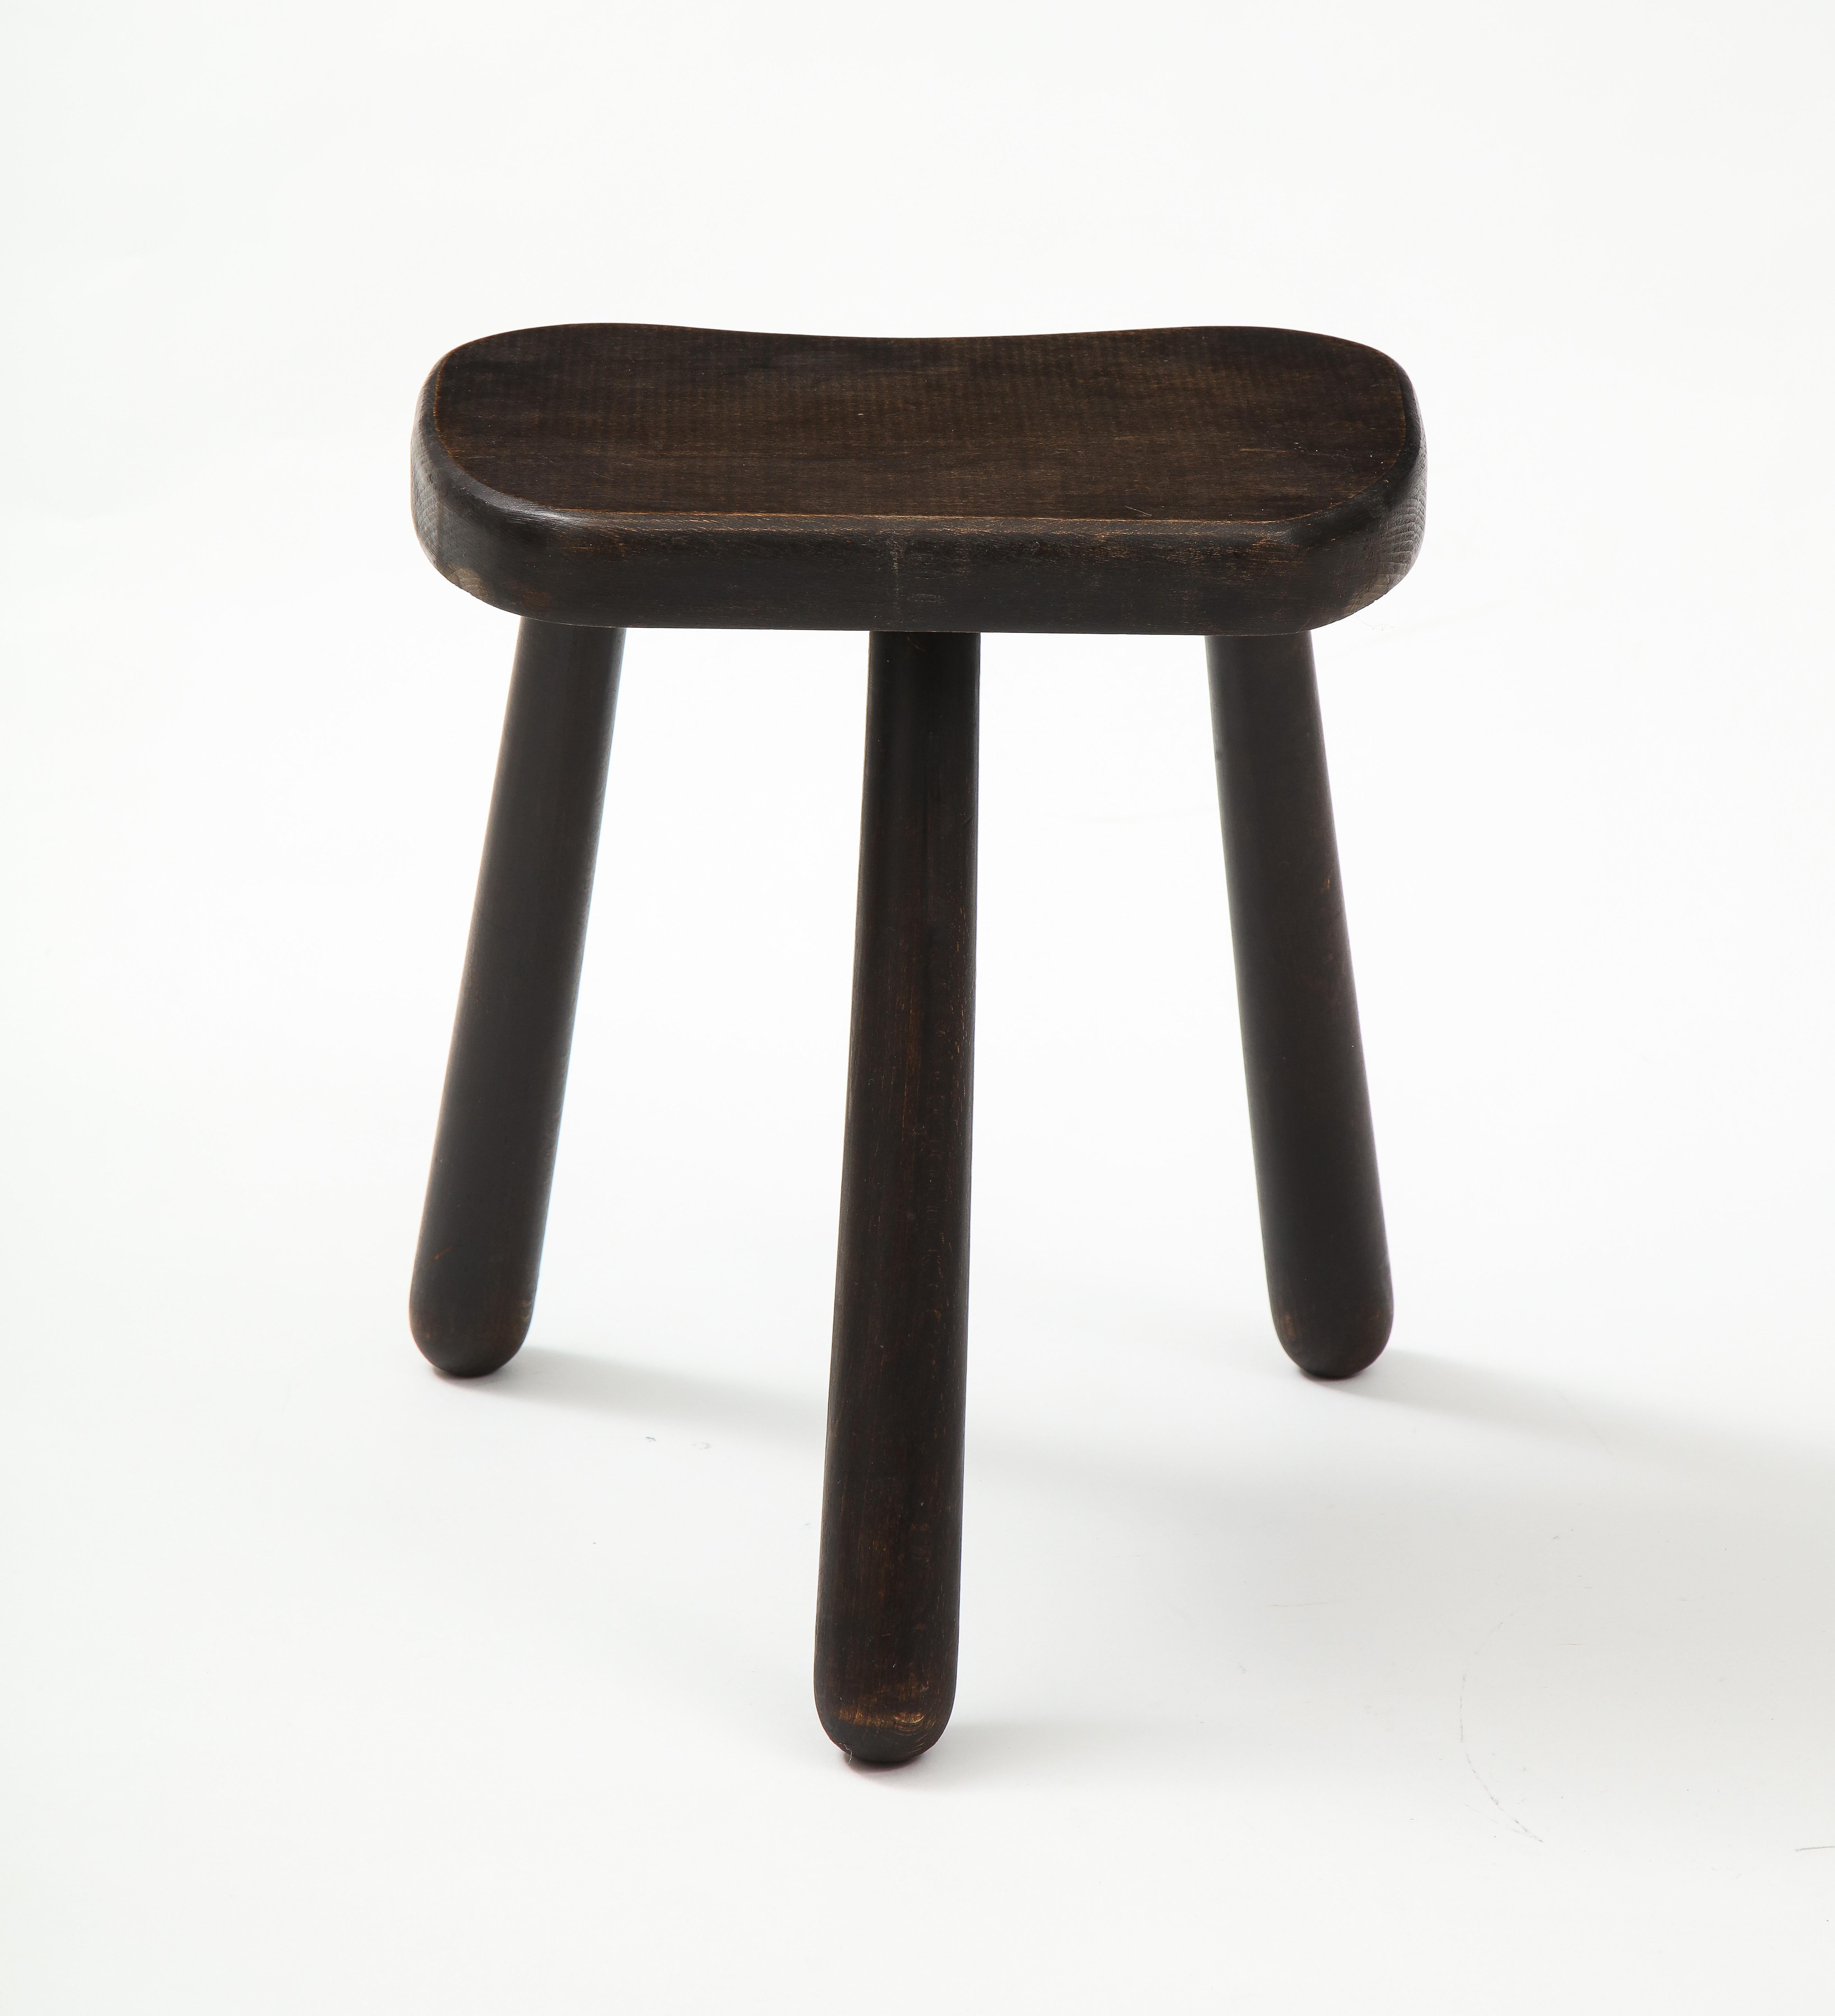 Small wooden mid century stool with rounded legs, France, 1960's.